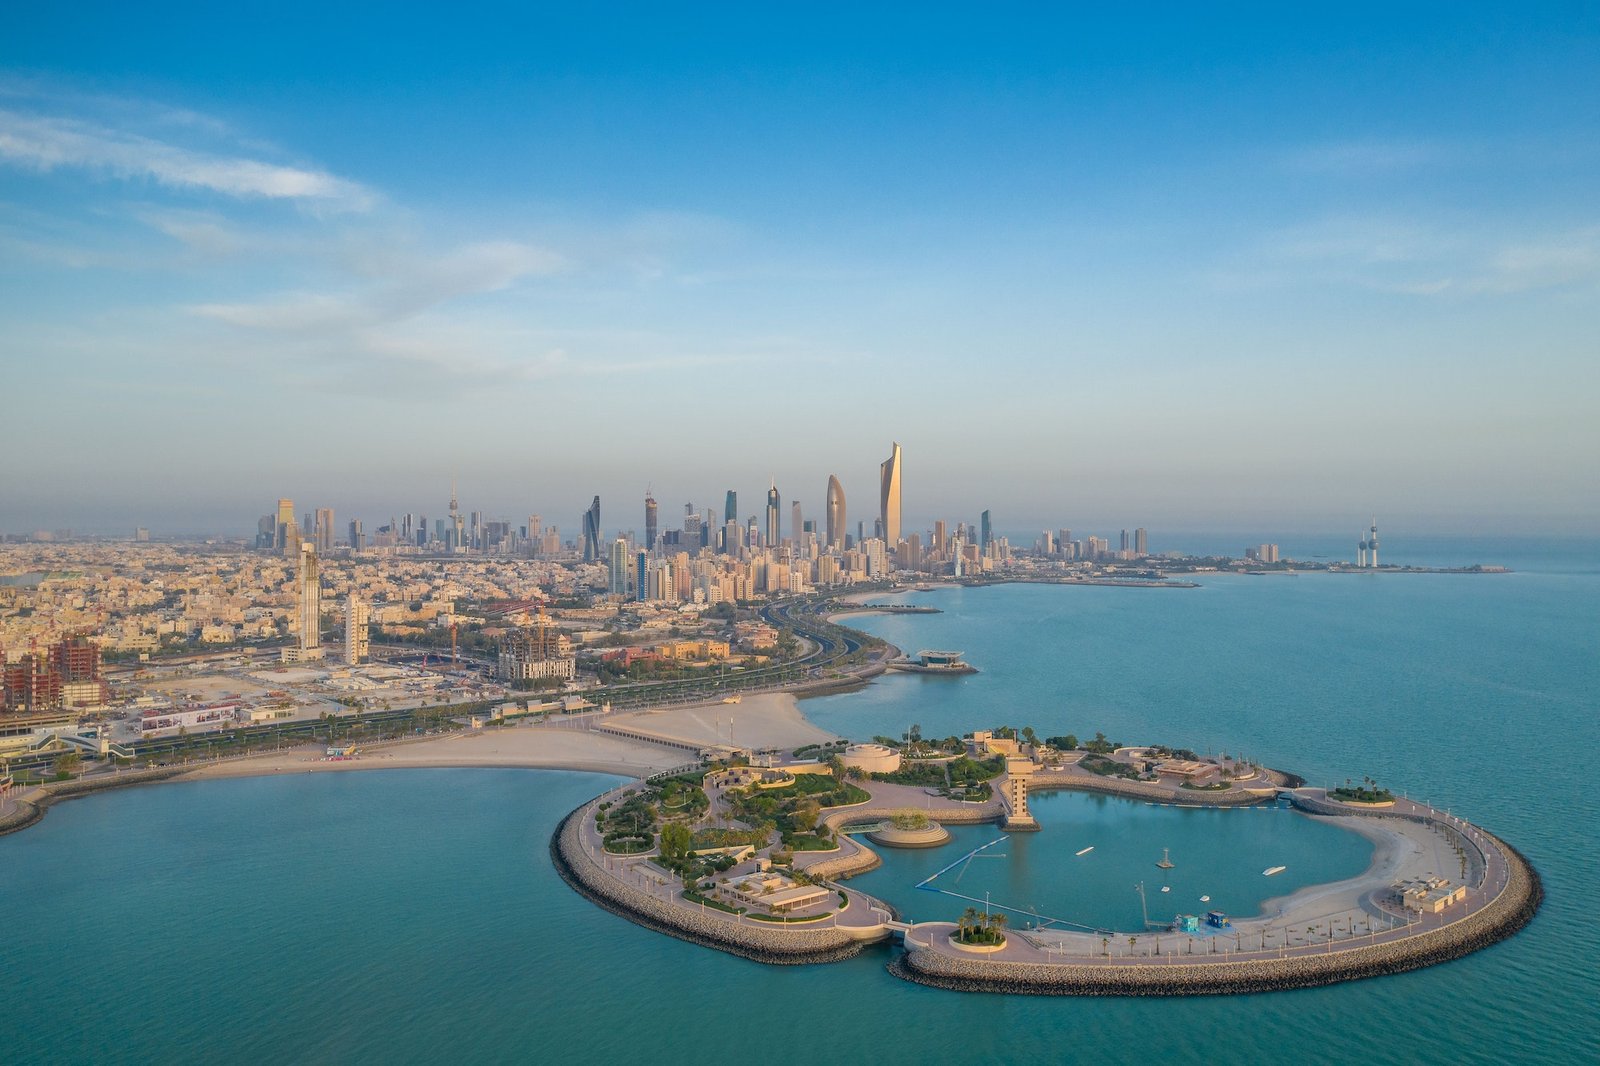 High-angle shot of The Green Island with a skyline of the city of Kuwait in the background